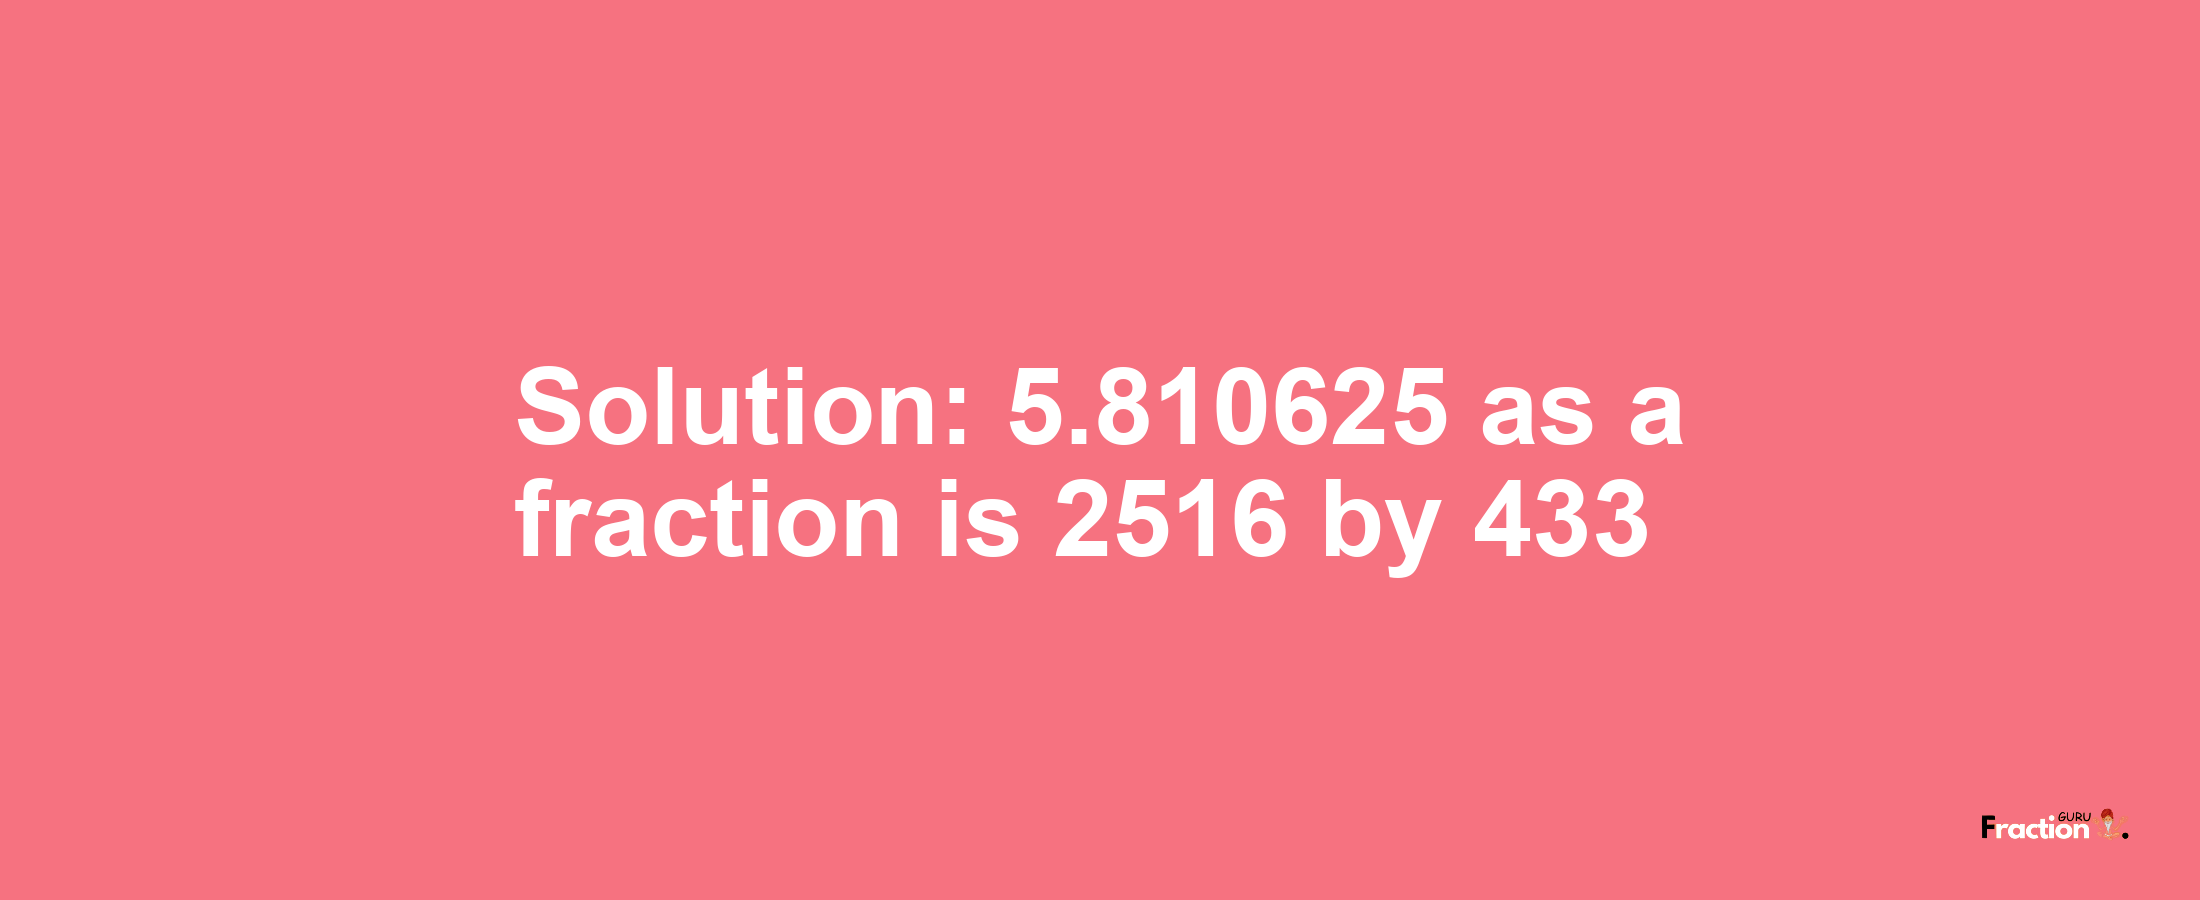 Solution:5.810625 as a fraction is 2516/433